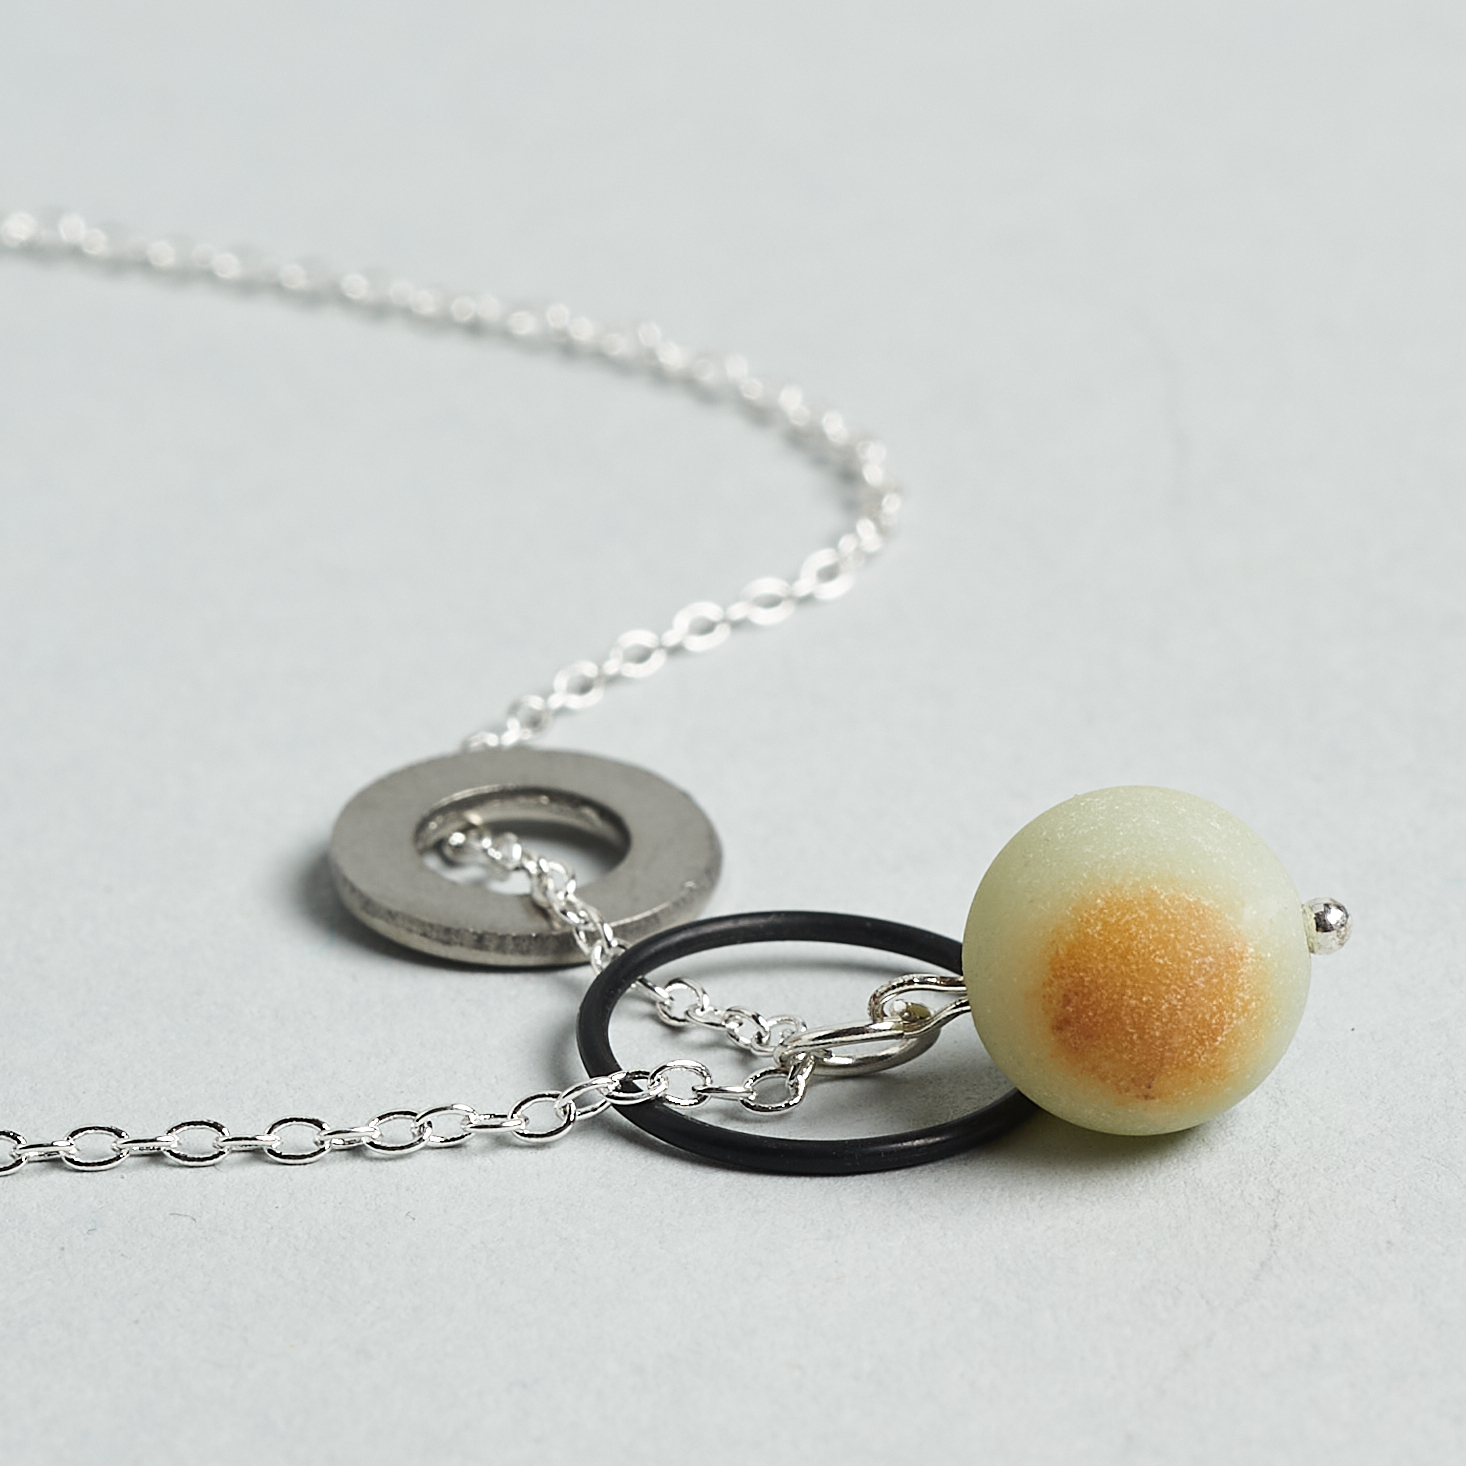 Love Goodly April 2021 Gogh Jewelry Design Eco-Friendly Necklace